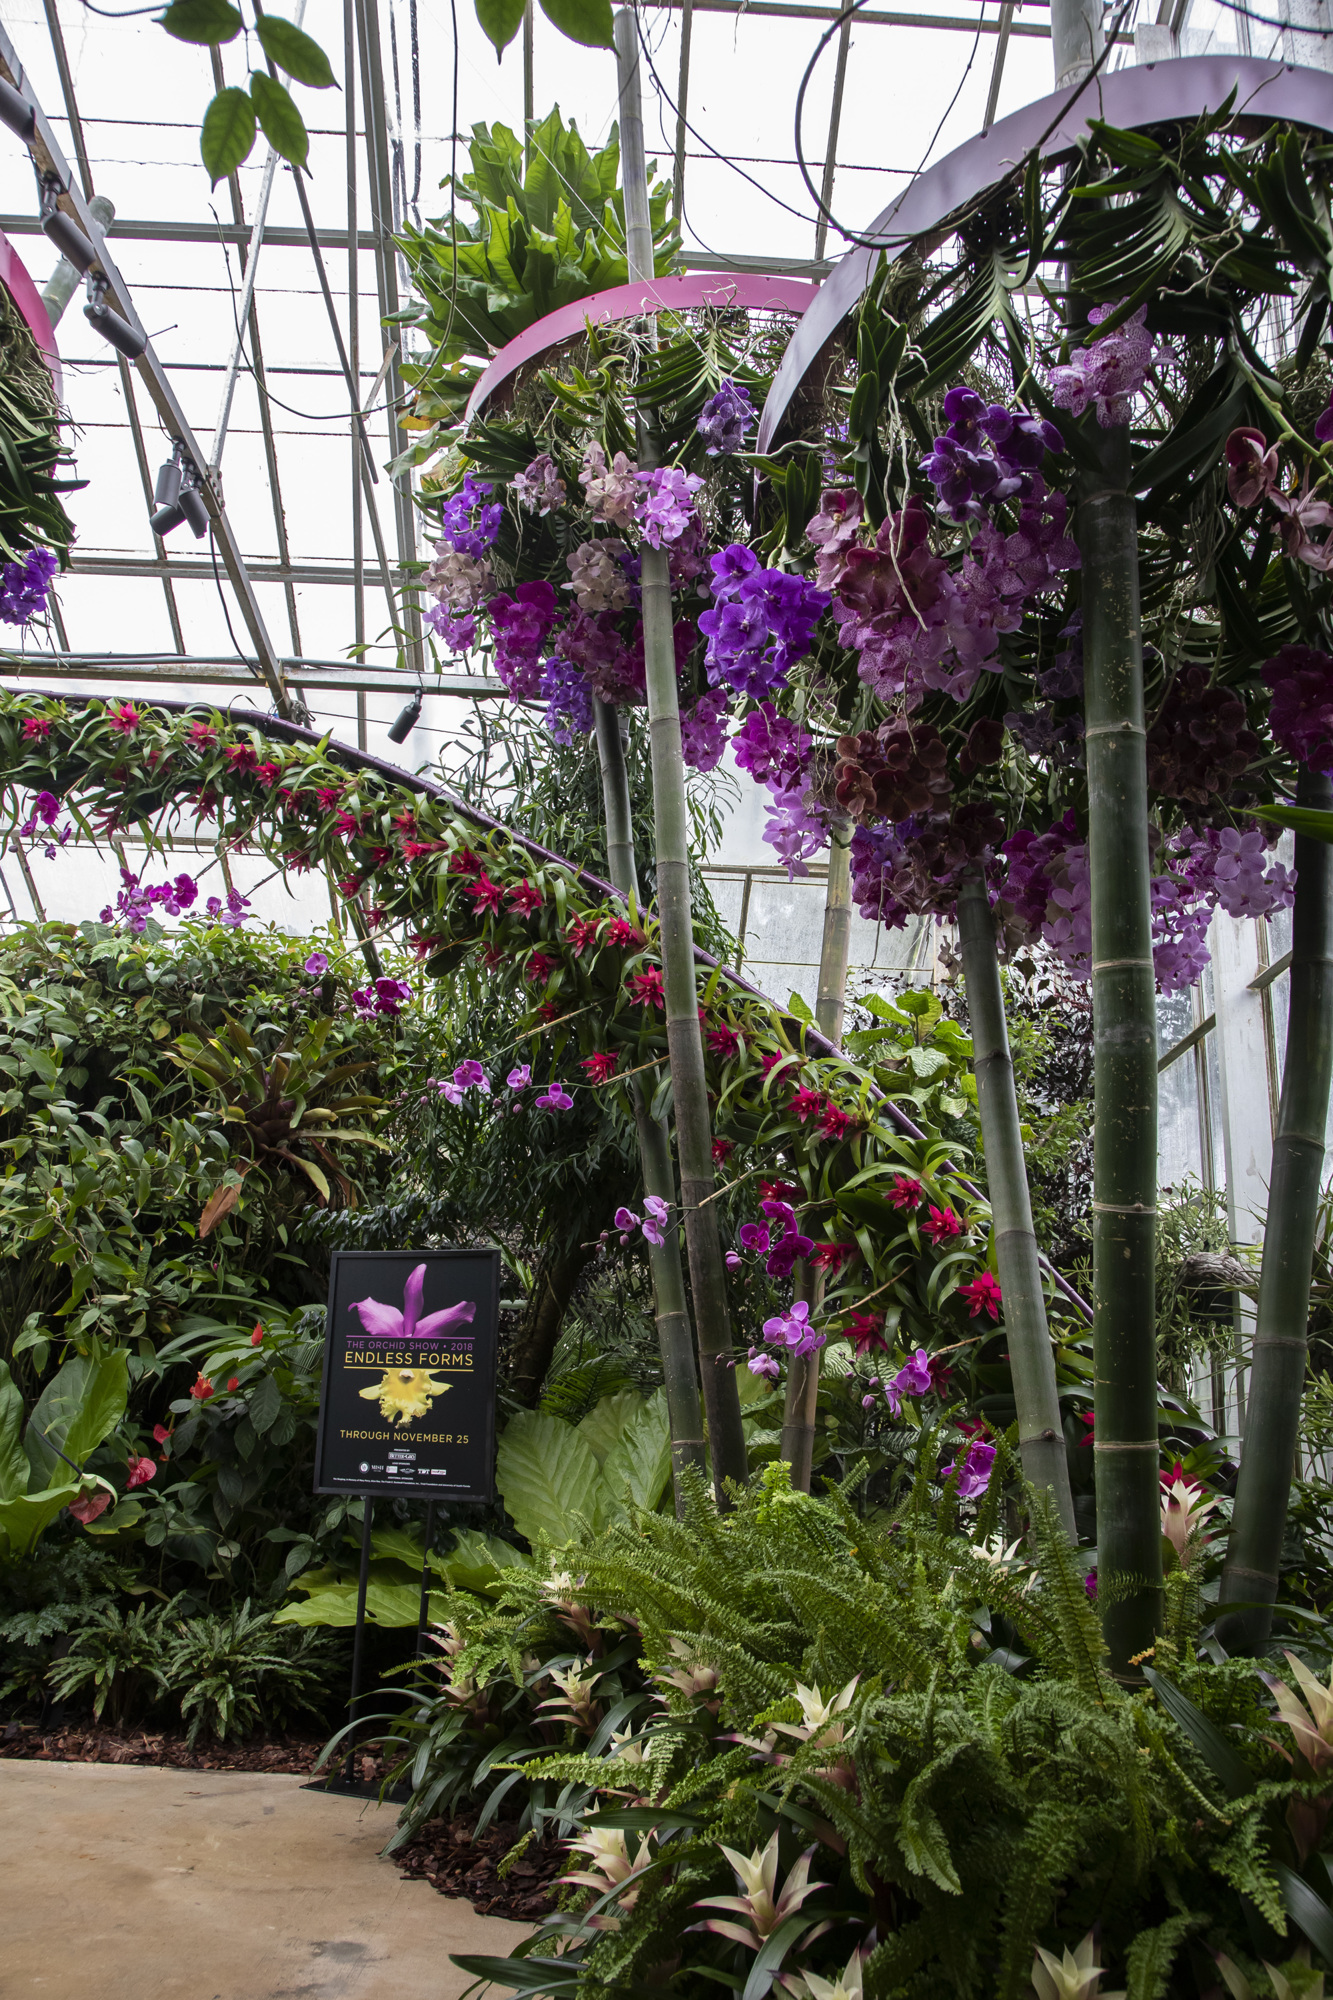 Several hanging umbrella structures, along with the helix-shaped orchid ribbon, display orchids in various forms. Photo by Matt Holler courtesy of Selby Gardens